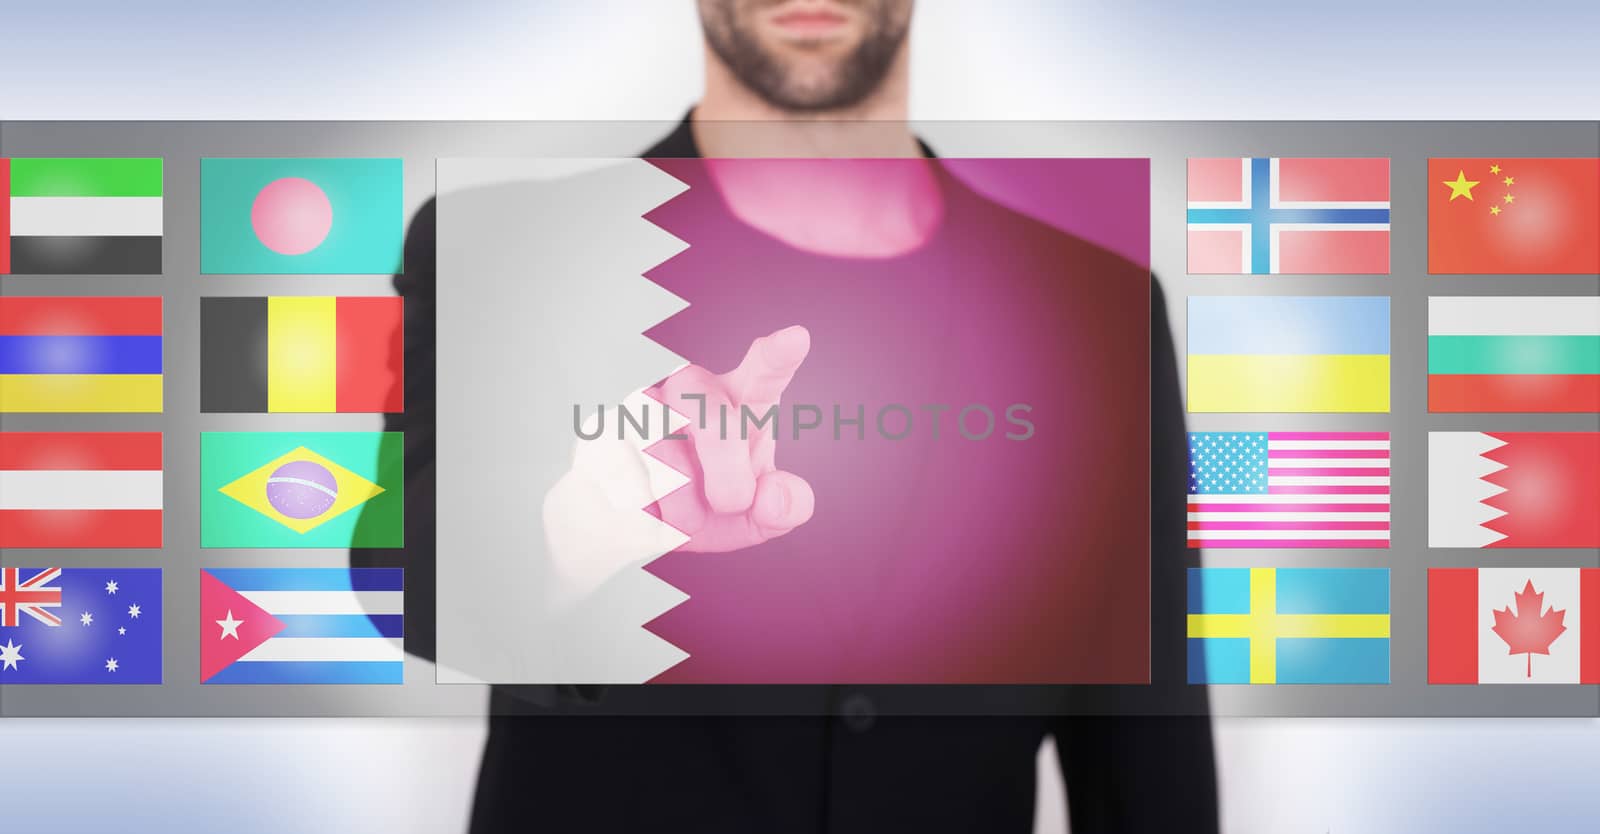 Hand pushing on a touch screen interface, choosing language or country, Qatar